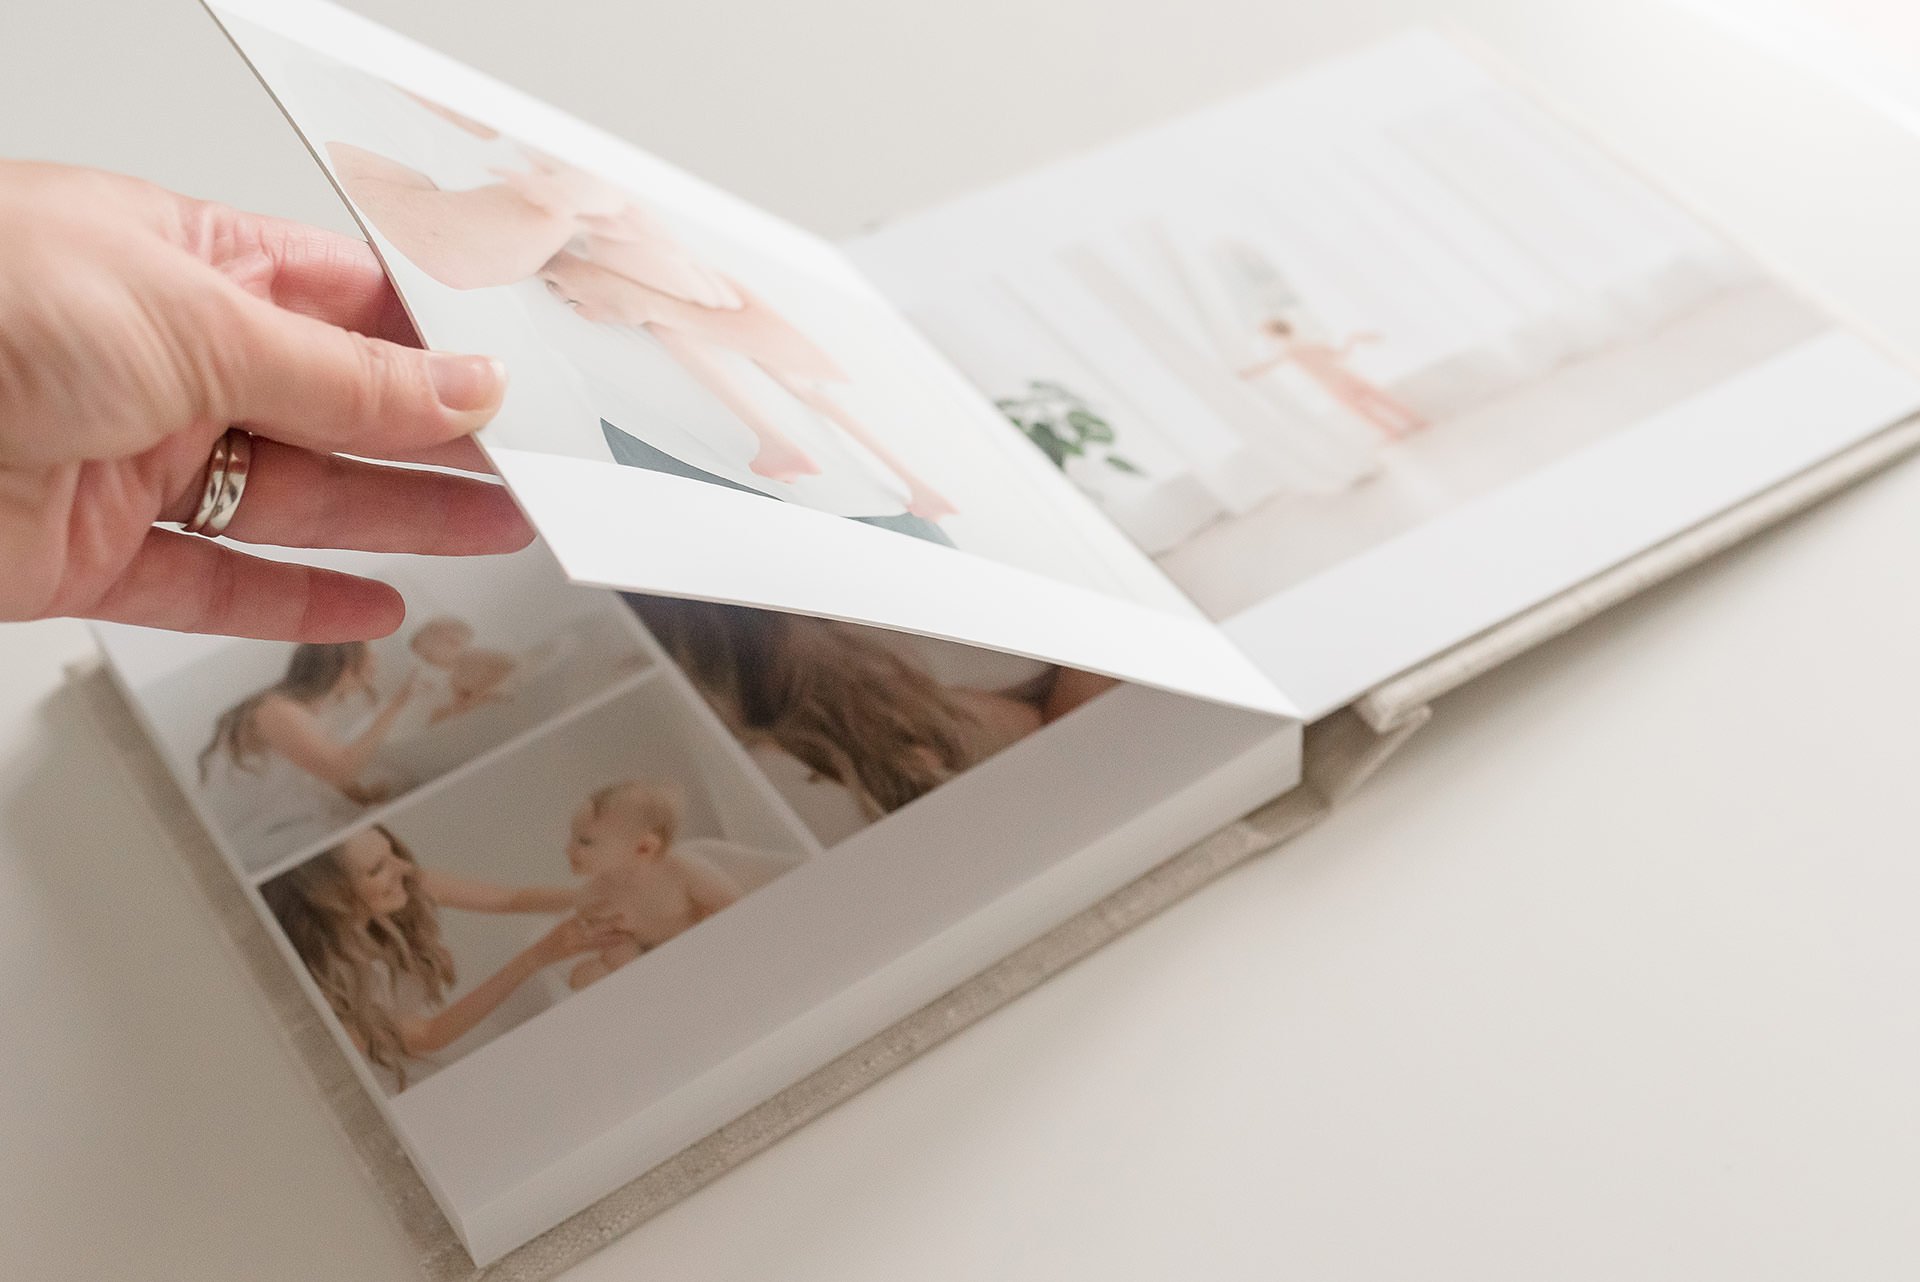 album-paper-custom-made-photography-prints-family-photographer-turn-memories-into-gifts.jpg